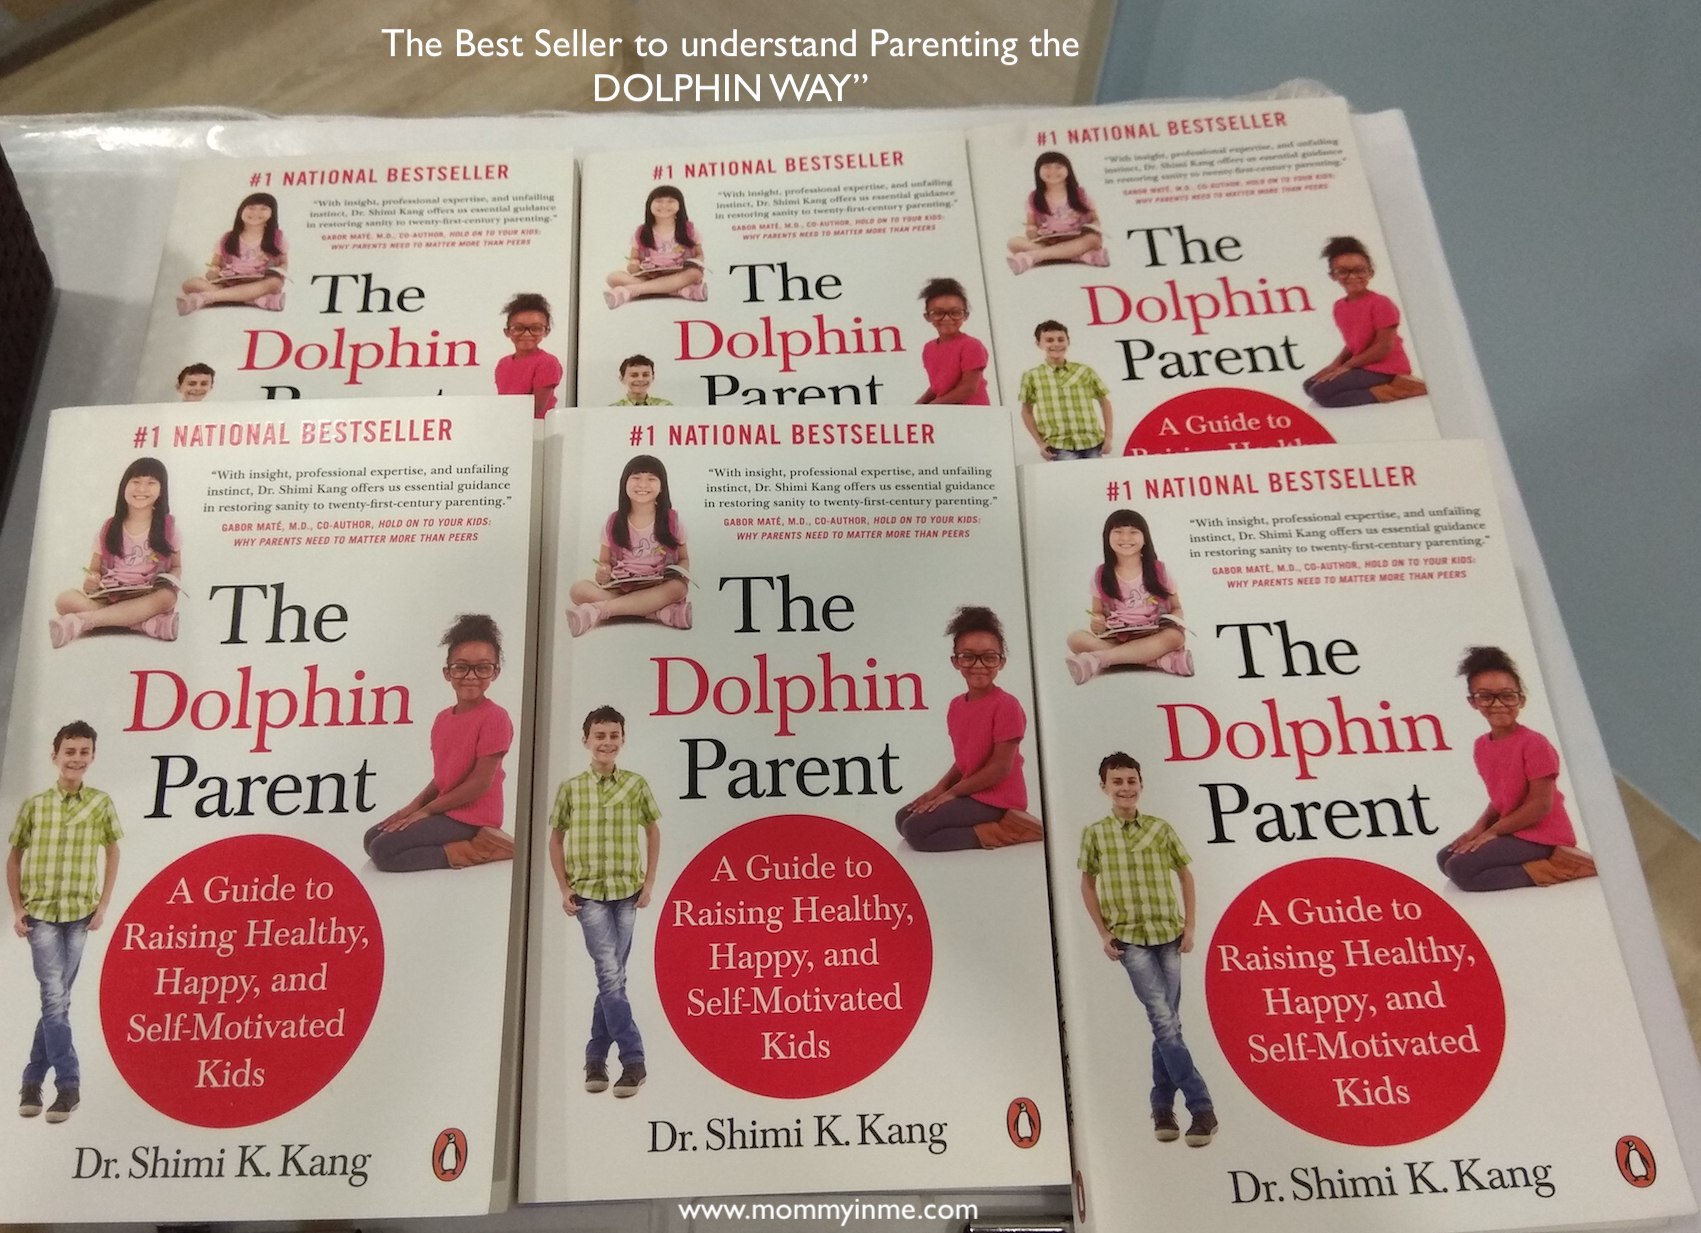 We're in 21st century & need to blend Dolphin parenting in our lives. Read what Dr. Shimi Kang, TedX speaker & Harvard trained doctor has to say. #dolphinparent #DrShimikang #parentinghacks #parentingwin #parentingtips #newageparent #mustread